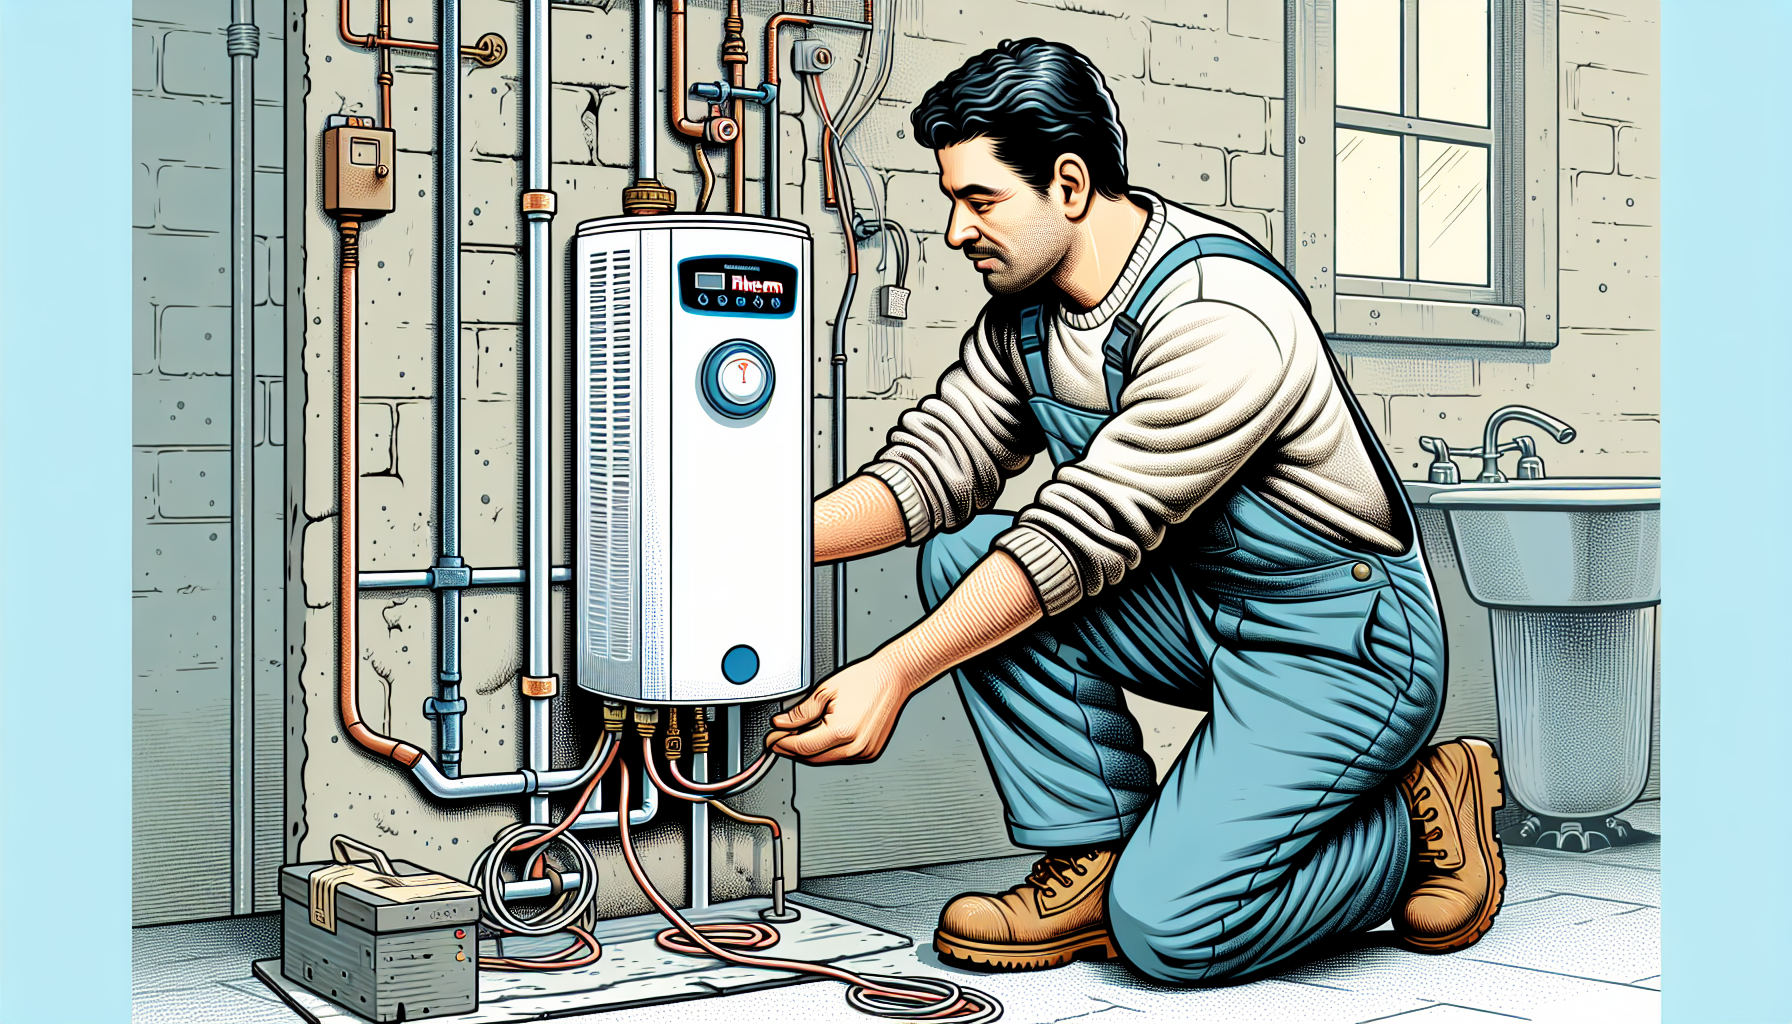 Illustration of the installation process of a hot water system